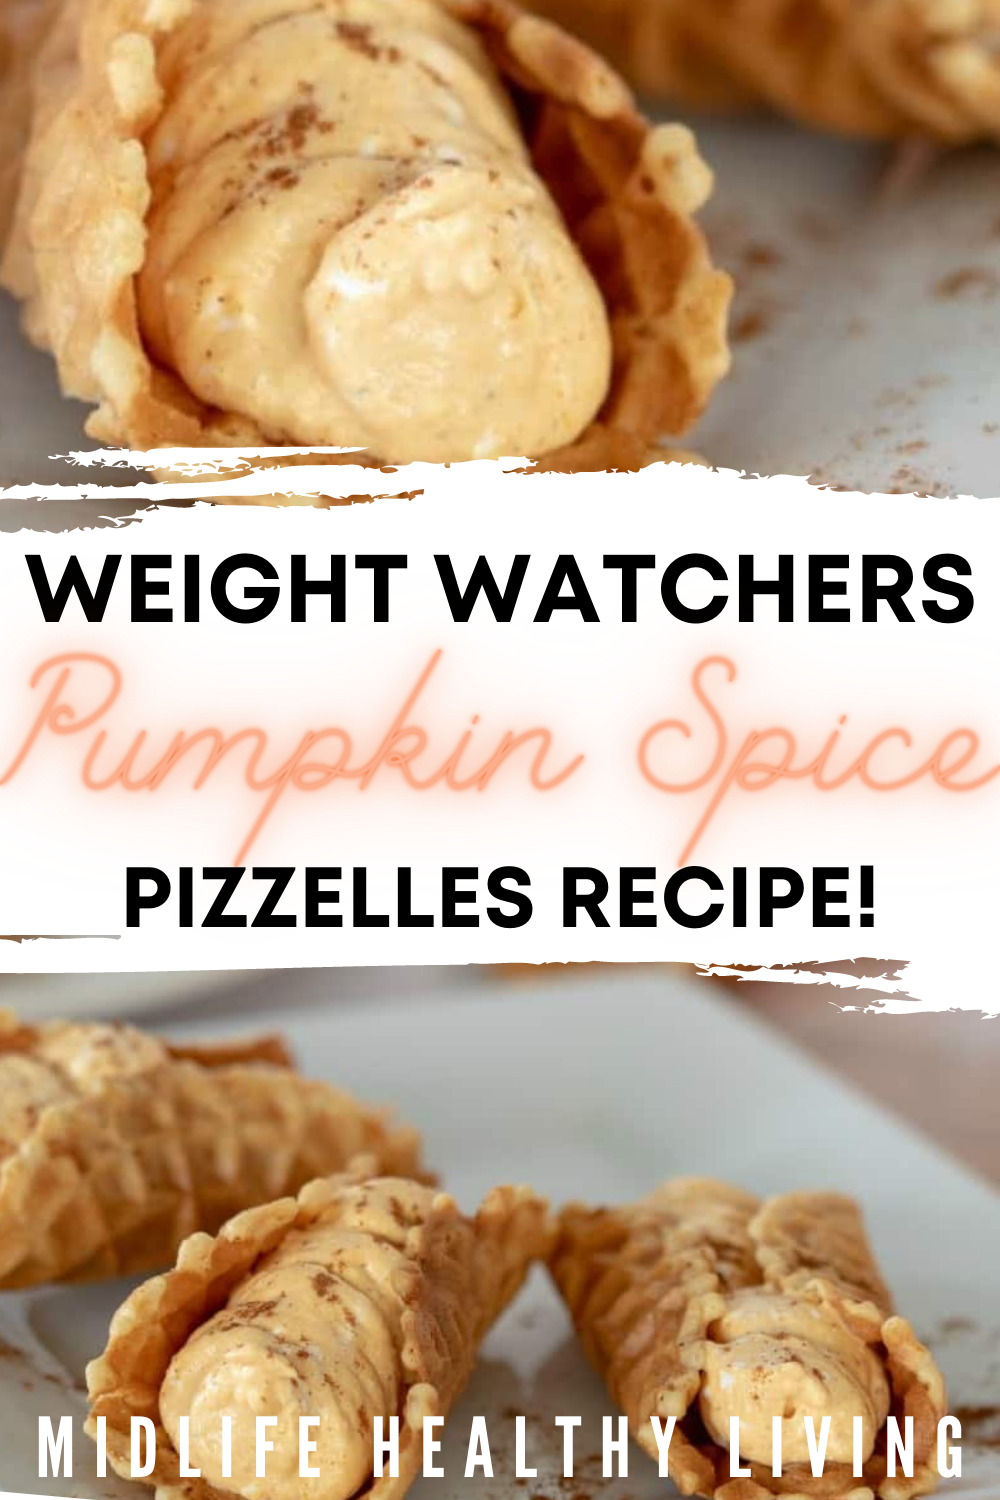 Pin showing the finished weight watchers pumpkin spice pizzelles ready to eat with title in the middle.